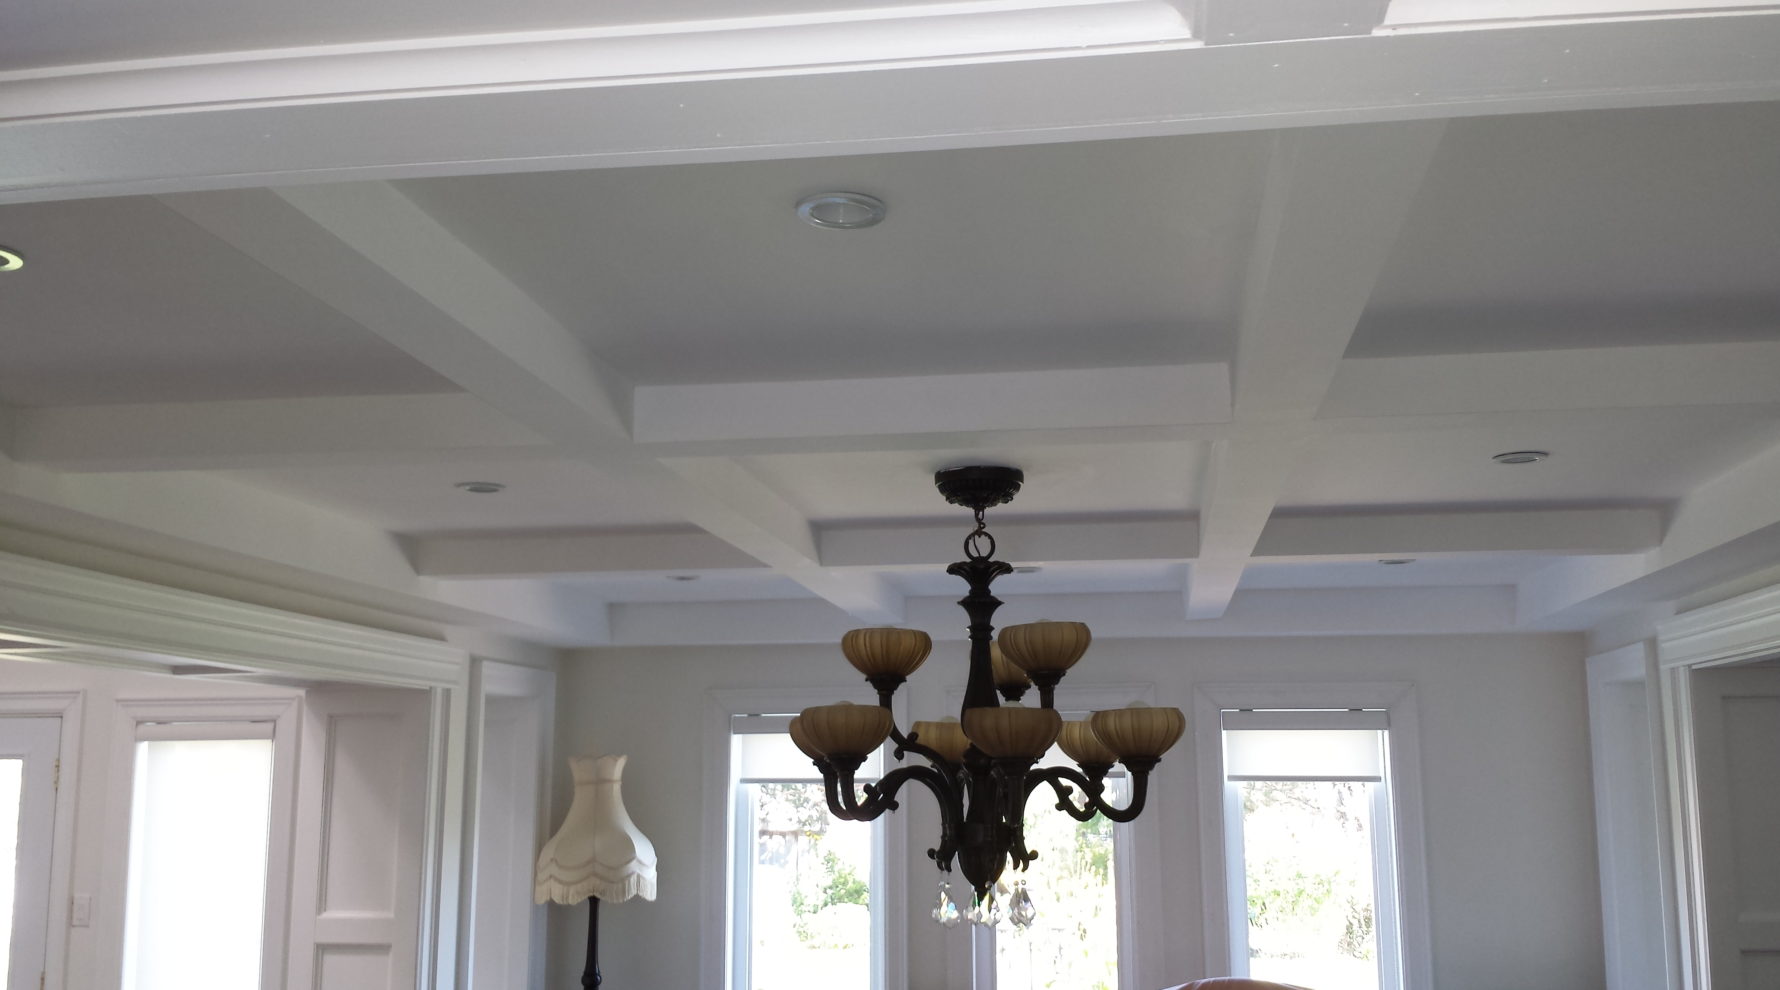 Ceiling Specialists Ceiling Options After Stipple Ceiling Removal